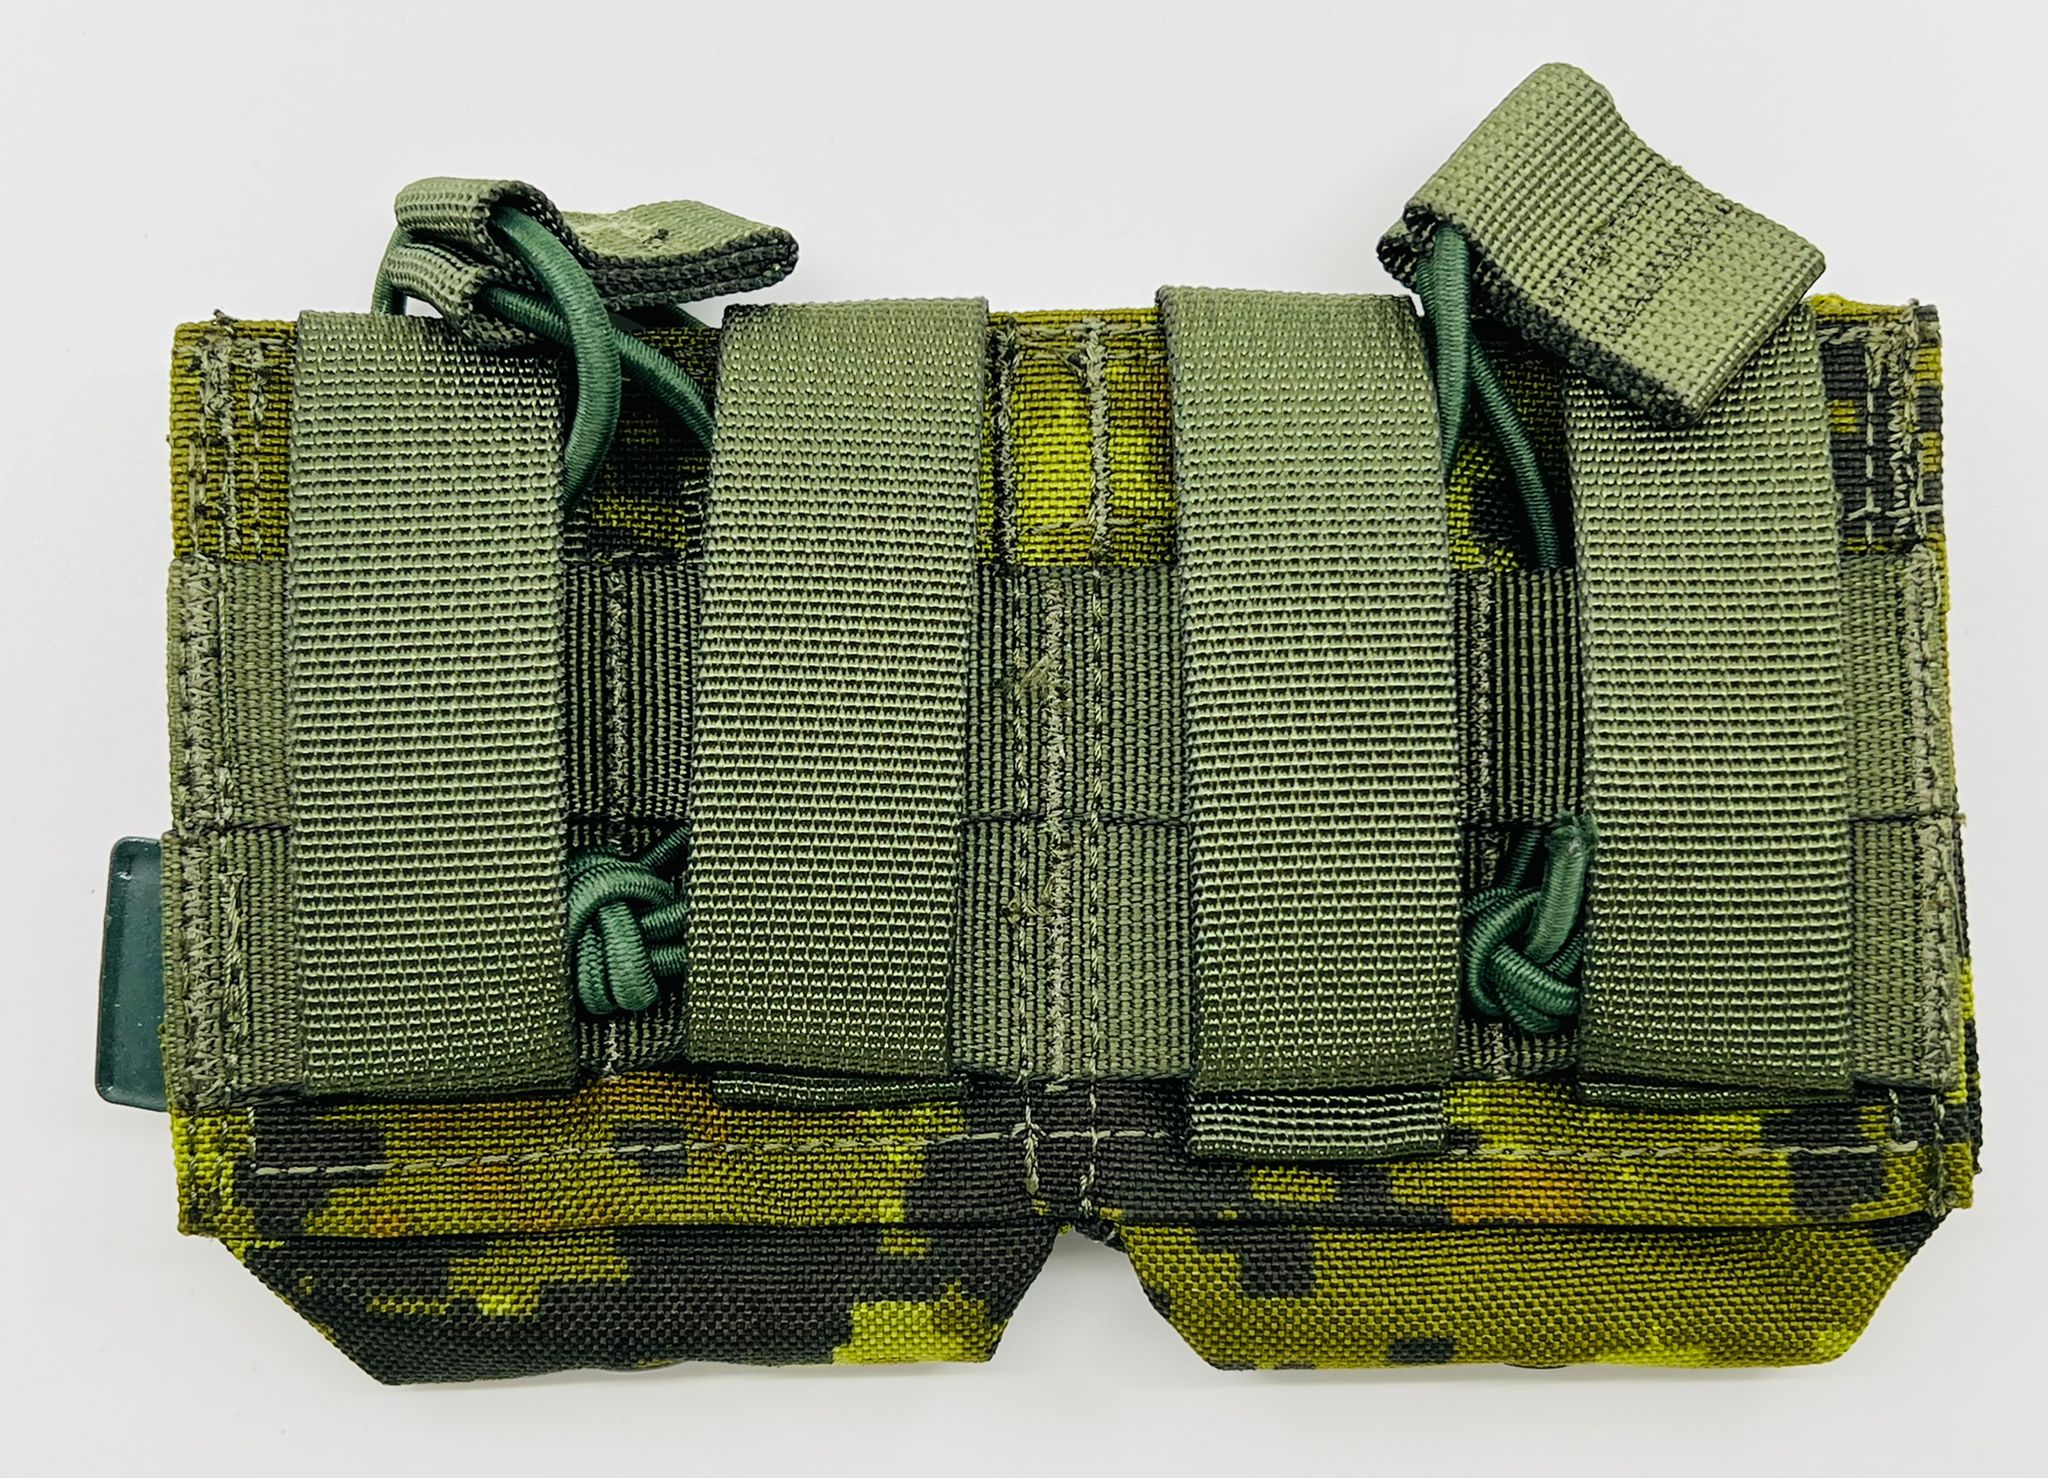 SHS-1012 M14 MAG POUCH DOUBLE